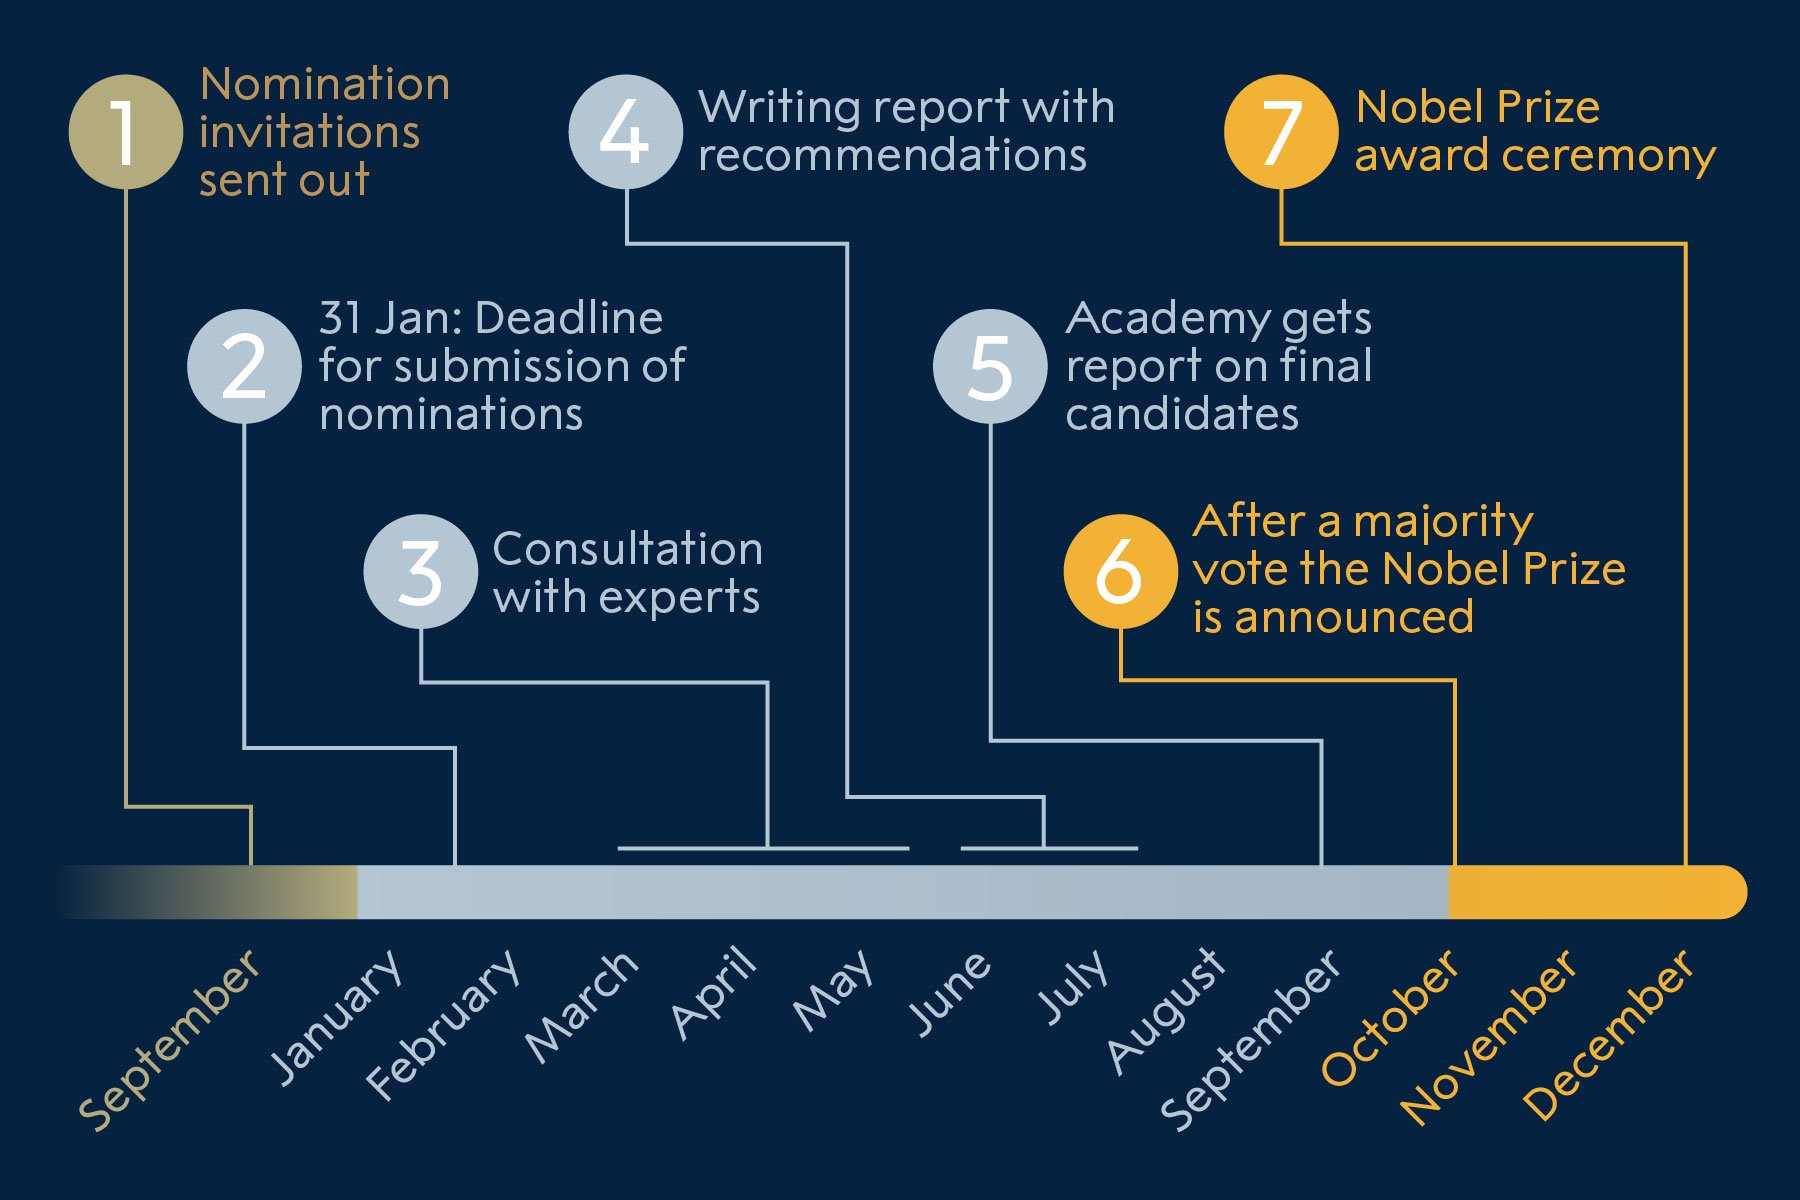 The nomination process for Nobel Laureates in Physics